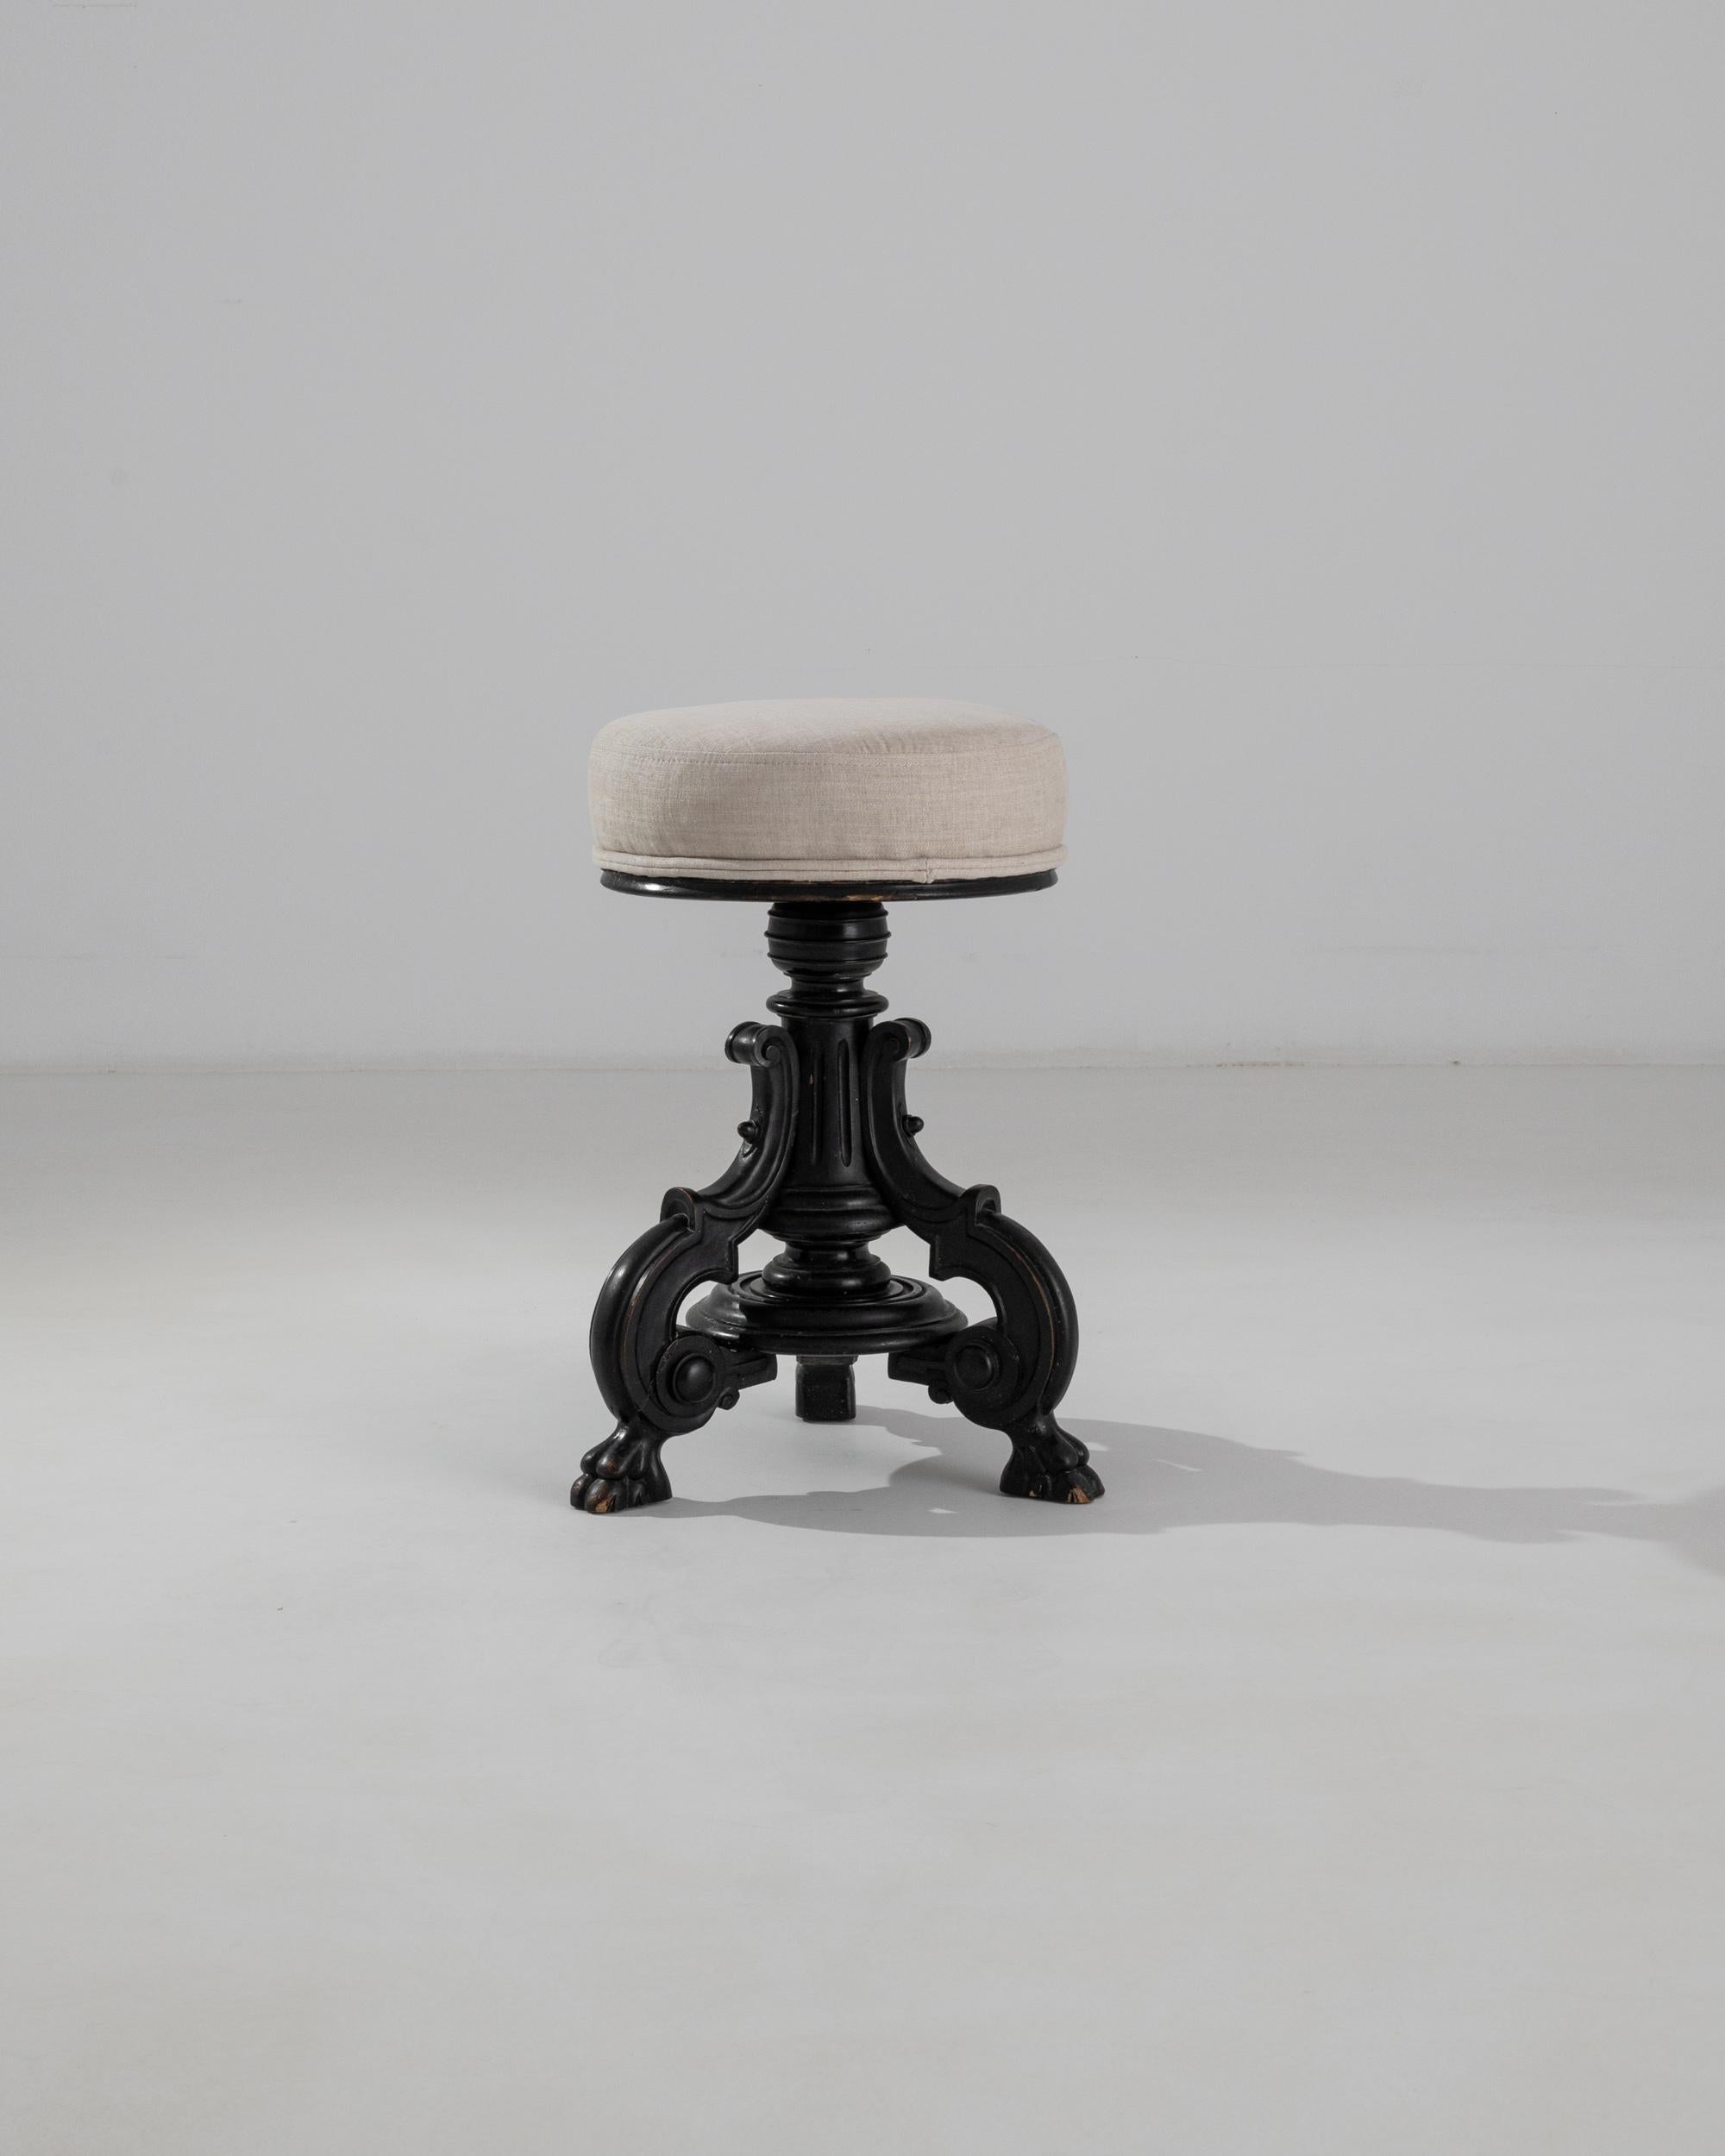 This beautiful antique wooden stool reflects the extravagant decoration of the Belle Epoque. Crafted in 1880s France, the adjustable seat speaks to the mechanical advancements of the era, while the decorative motifs hark back to the glory of